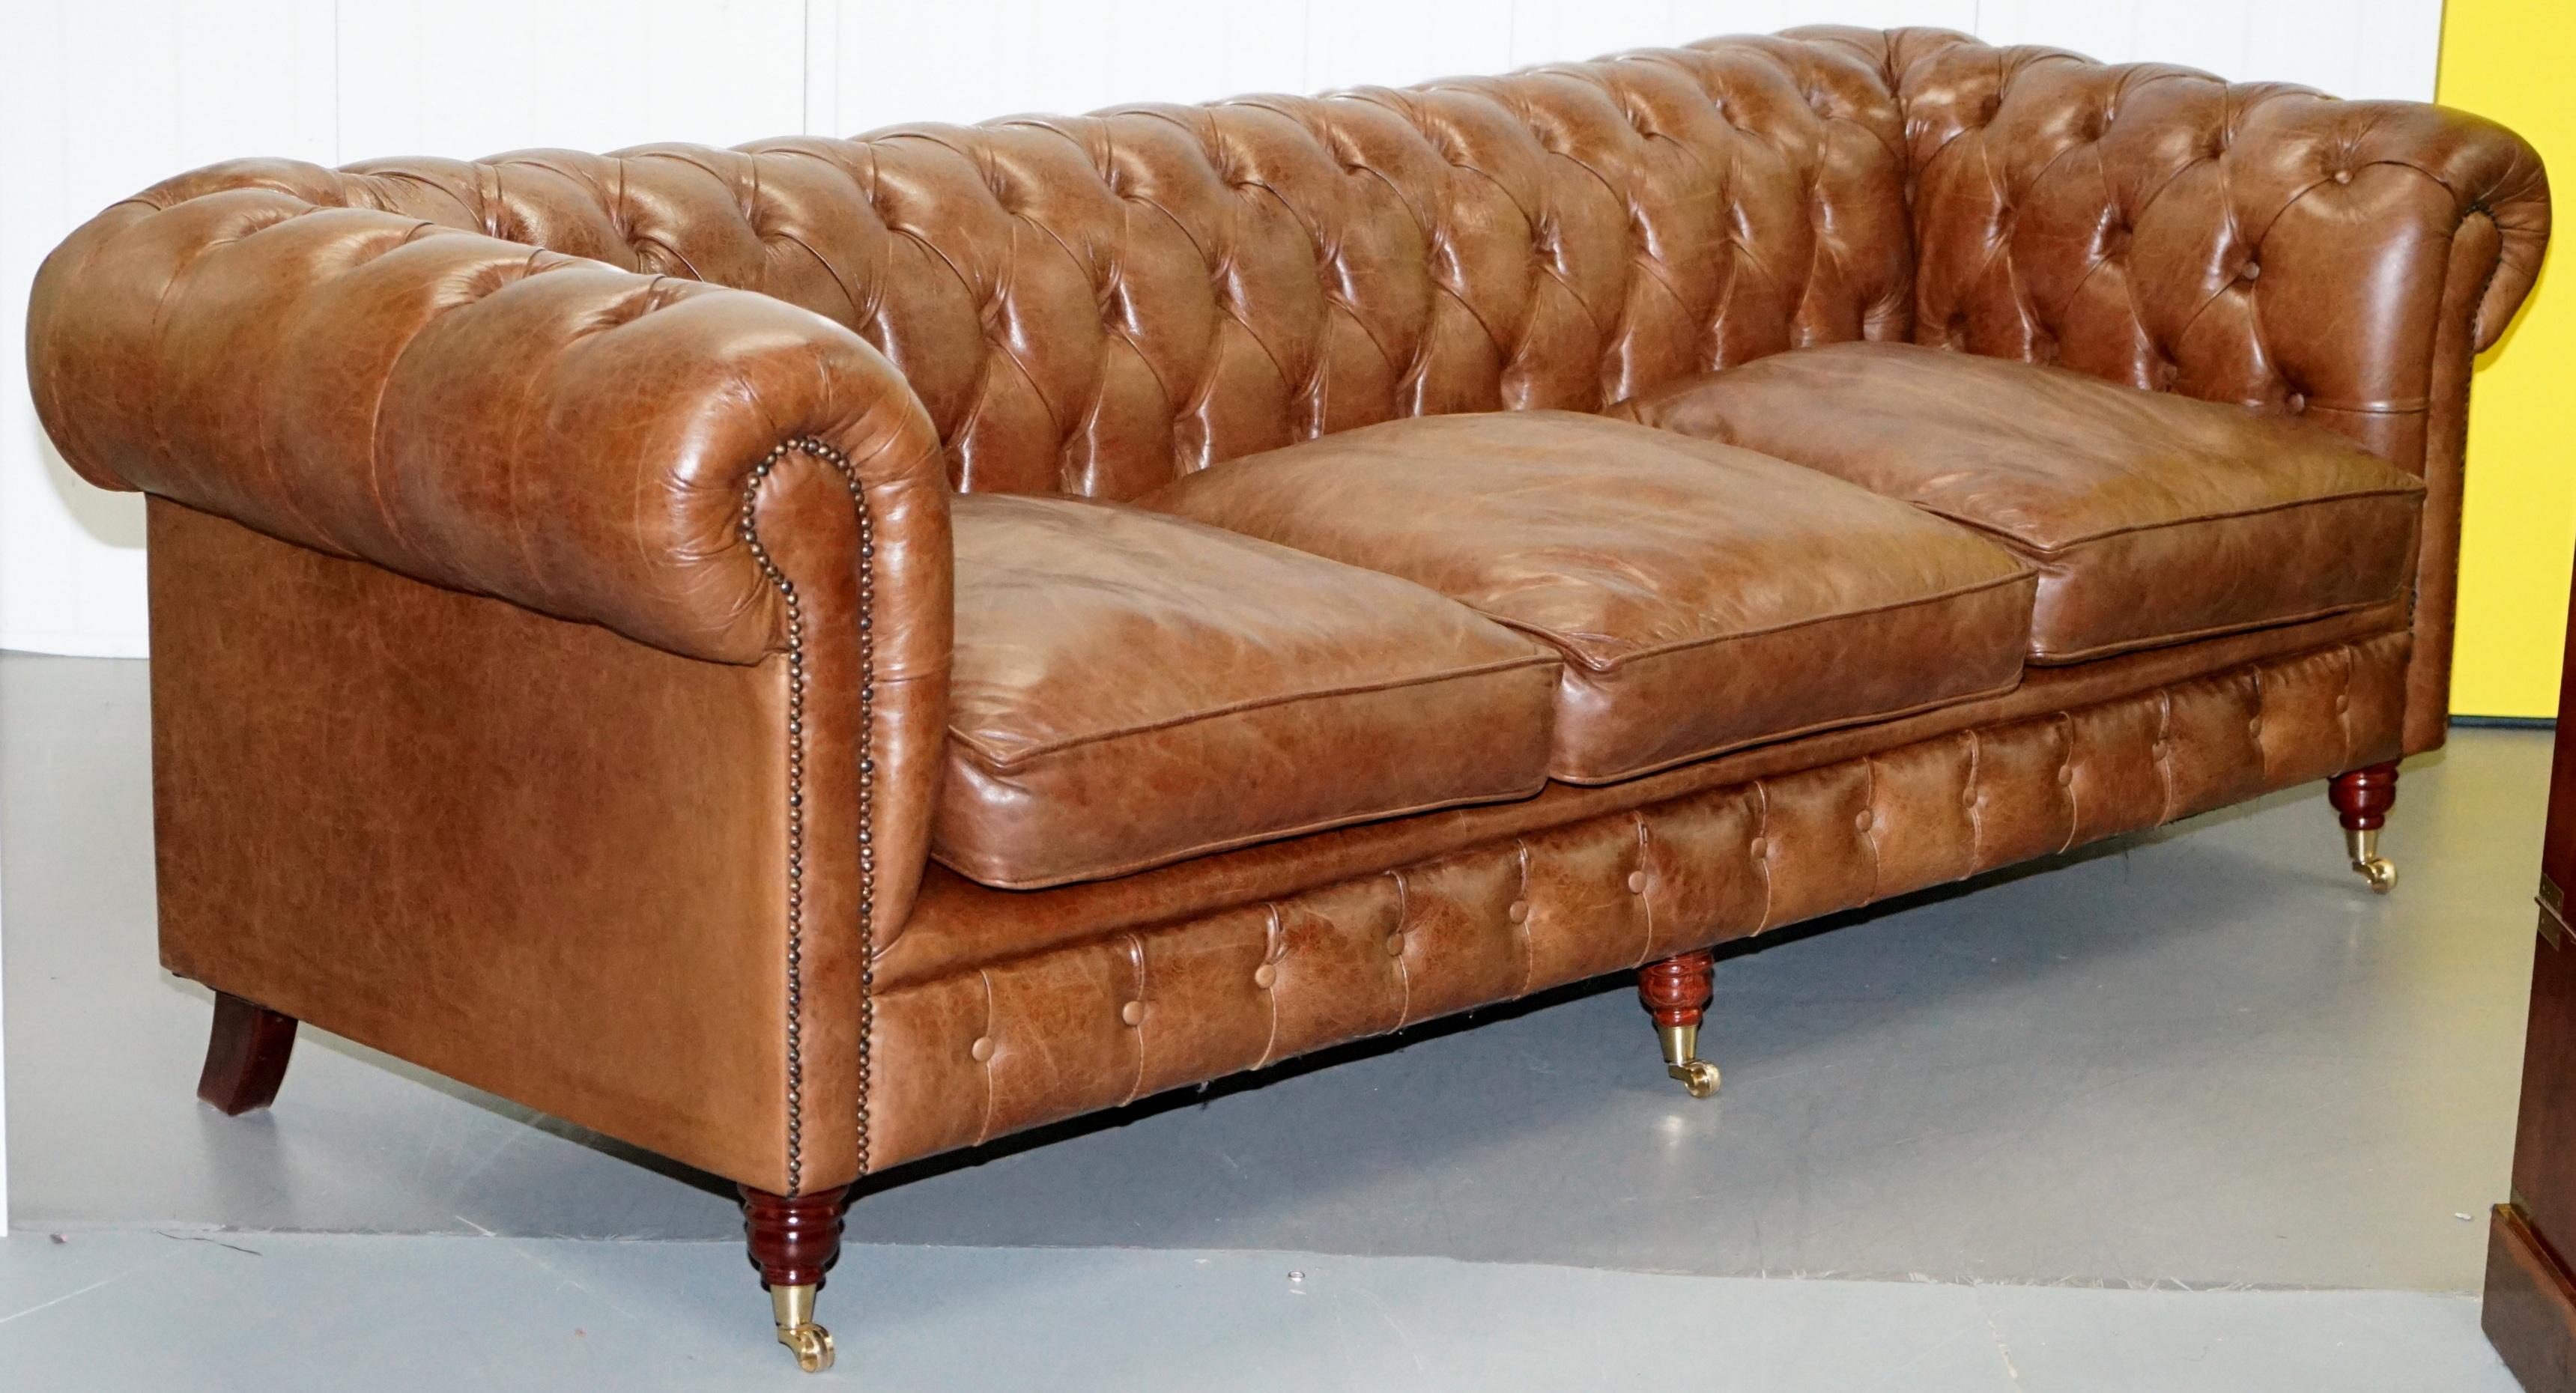 Chesterfield Heritage Brown Leather Sofas & Armchair Suite 2-3 3-4 Seat Sofas 2